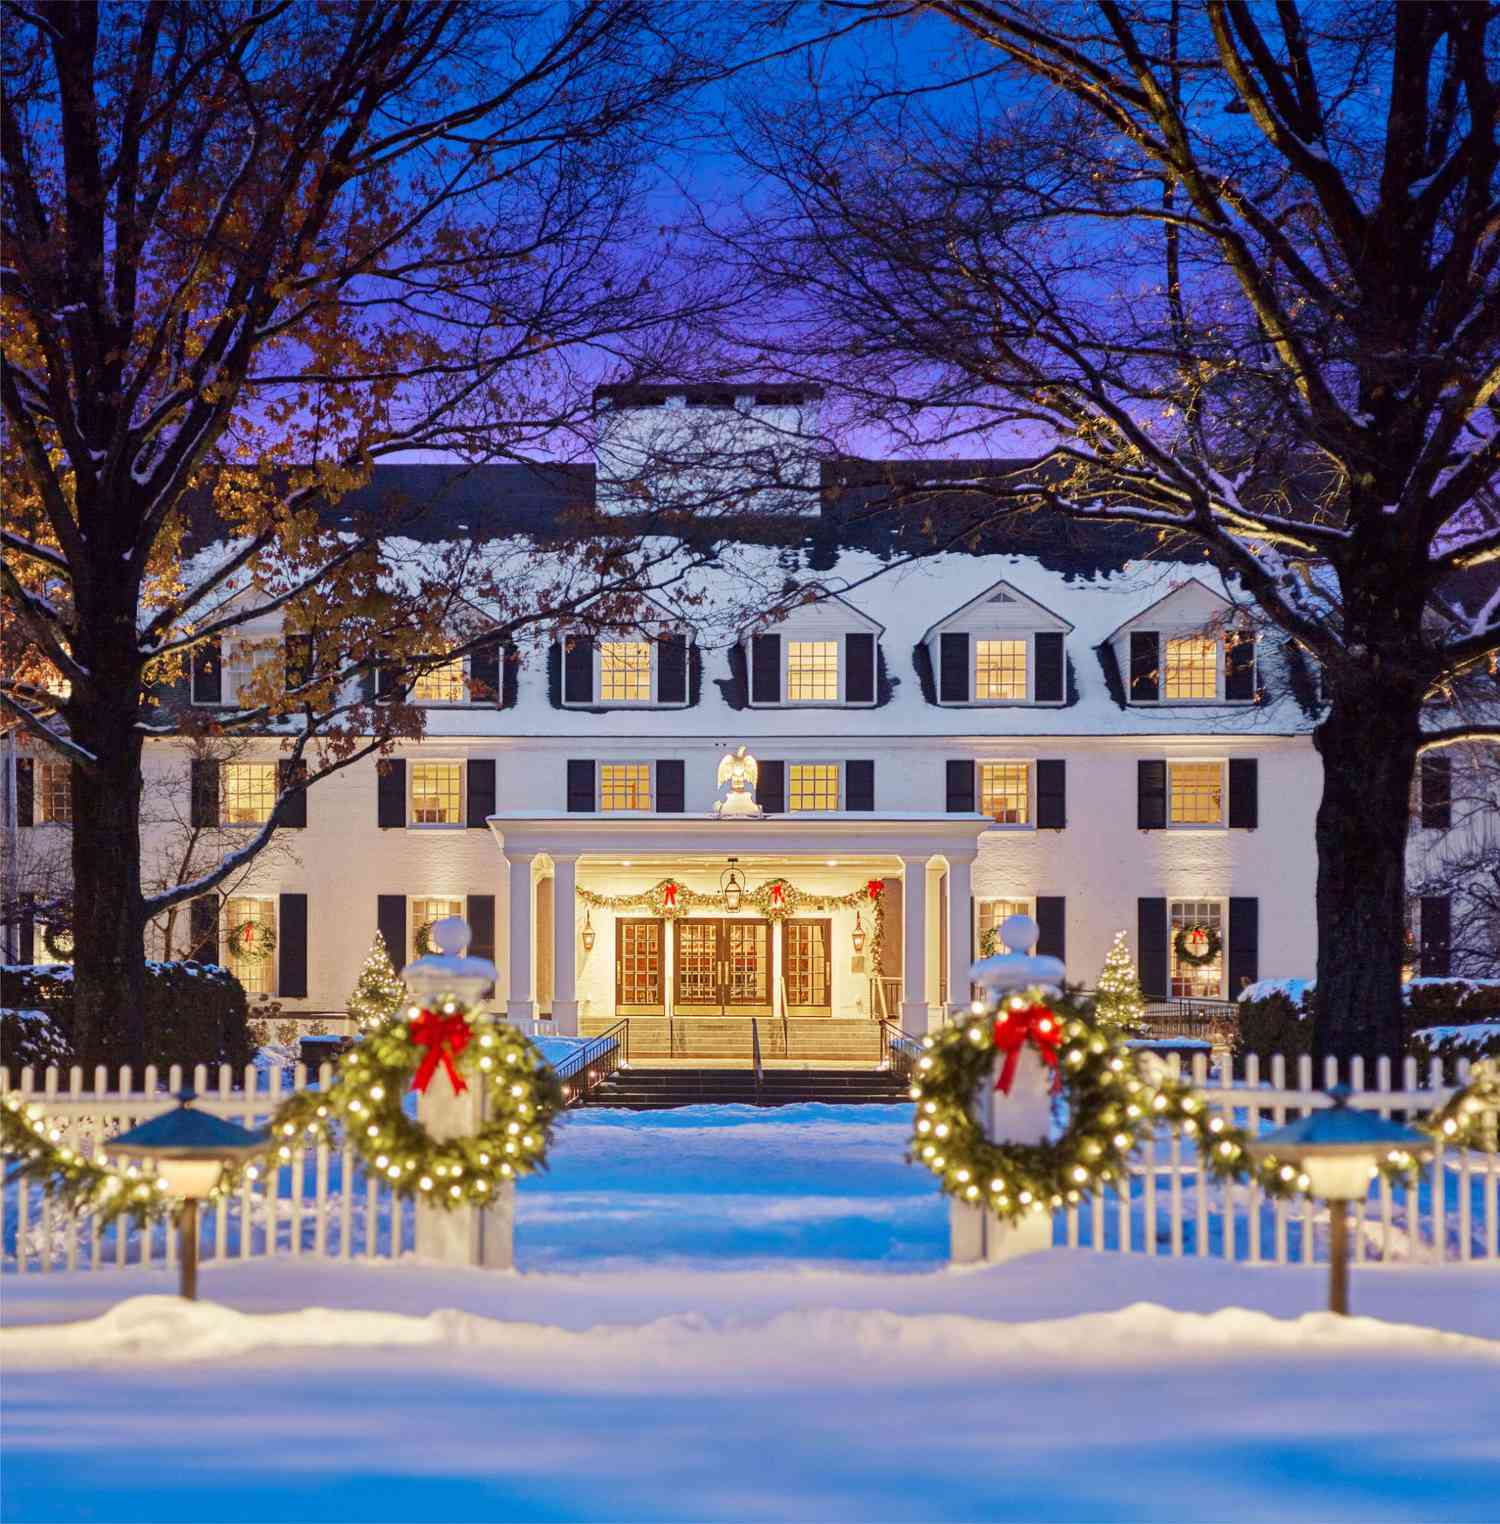 Woodstock Inn & Resort with holiday decorations